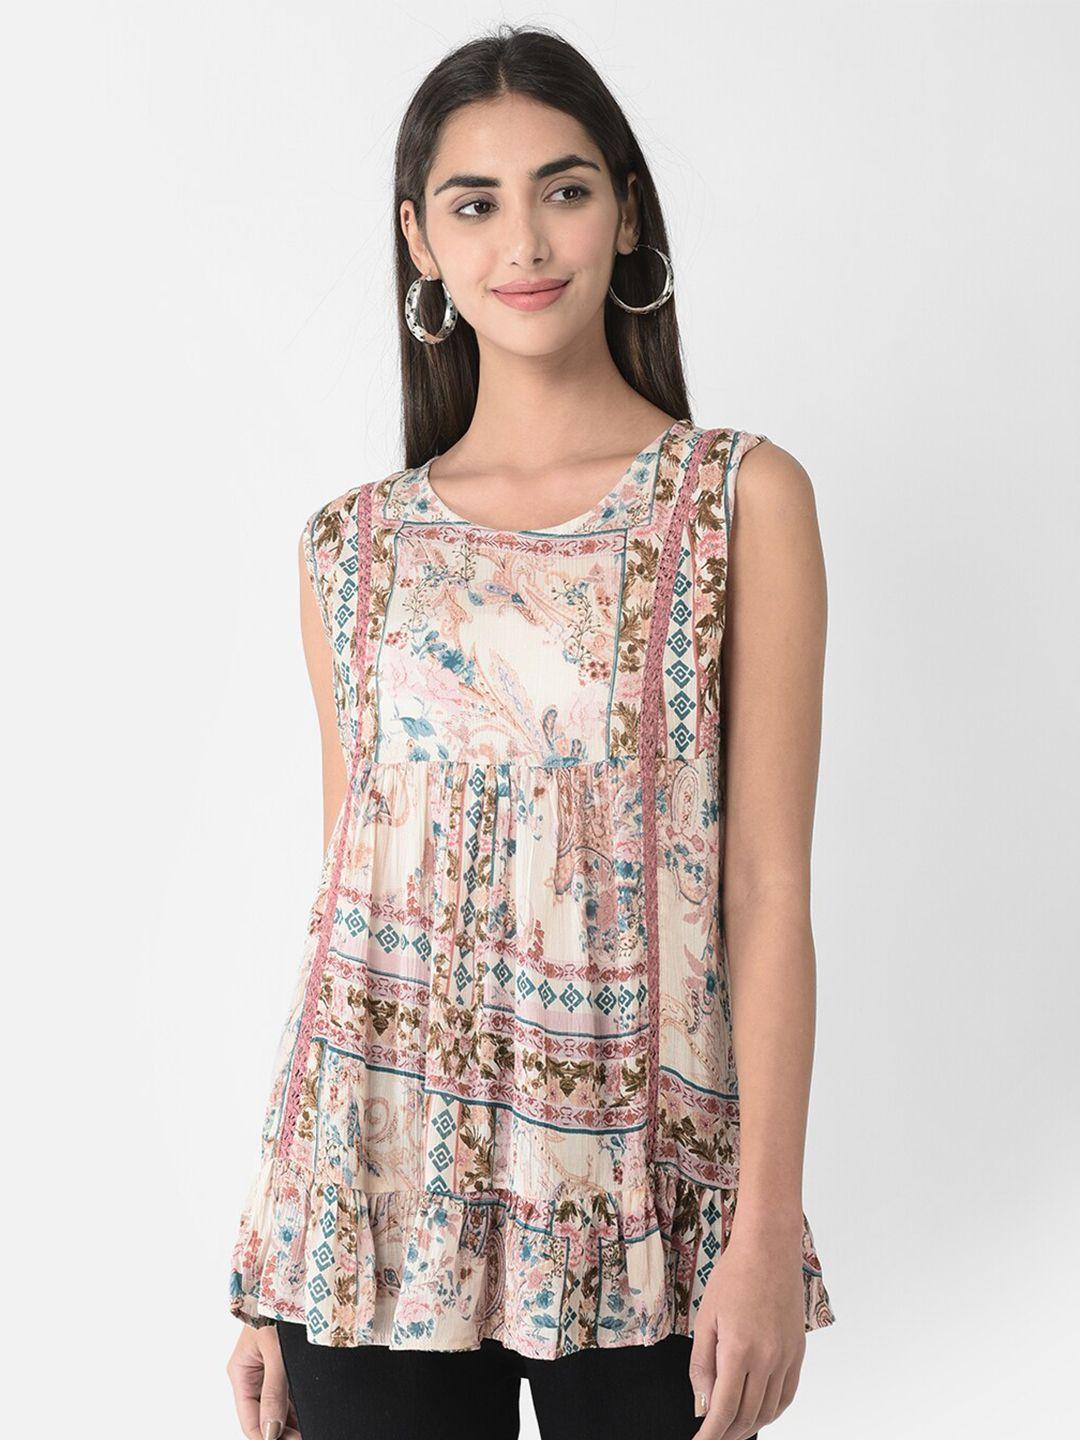 veldress floral printed pleated a-line top